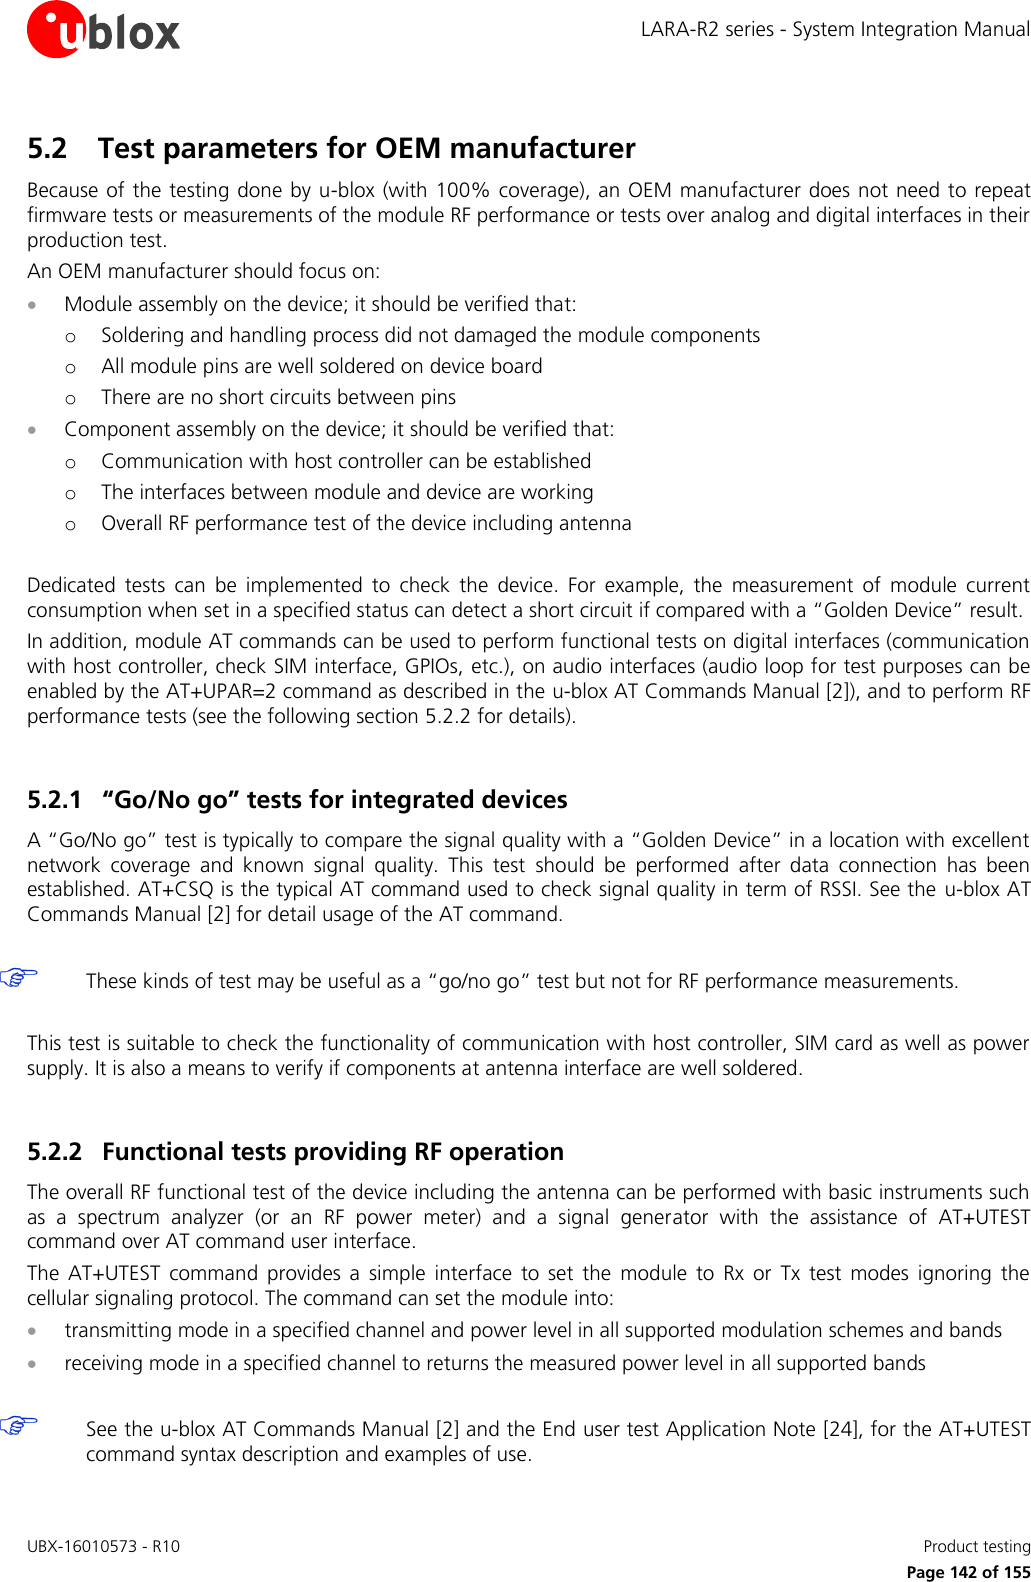 LARA-R2 series - System Integration Manual UBX-16010573 - R10    Product testing     Page 142 of 155 5.2 Test parameters for OEM manufacturer Because of the testing done by u-blox (with 100% coverage), an OEM manufacturer does not need to repeat firmware tests or measurements of the module RF performance or tests over analog and digital interfaces in their production test. An OEM manufacturer should focus on:  Module assembly on the device; it should be verified that: o Soldering and handling process did not damaged the module components o All module pins are well soldered on device board o There are no short circuits between pins  Component assembly on the device; it should be verified that: o Communication with host controller can be established o The interfaces between module and device are working o Overall RF performance test of the device including antenna  Dedicated  tests  can  be  implemented  to  check  the  device.  For  example,  the  measurement  of  module  current consumption when set in a specified status can detect a short circuit if compared with a “Golden Device” result. In addition, module AT commands can be used to perform functional tests on digital interfaces (communication with host controller, check SIM interface, GPIOs, etc.), on audio interfaces (audio loop for test purposes can be enabled by the AT+UPAR=2 command as described in the u-blox AT Commands Manual [2]), and to perform RF performance tests (see the following section 5.2.2 for details).  5.2.1 “Go/No go” tests for integrated devices A “Go/No go” test is typically to compare the signal quality with a “Golden Device” in a location with excellent network  coverage  and  known  signal  quality.  This  test  should  be  performed  after  data  connection  has  been established. AT+CSQ is the typical AT command used to check signal quality in term of RSSI. See the  u-blox AT Commands Manual [2] for detail usage of the AT command.    These kinds of test may be useful as a “go/no go” test but not for RF performance measurements.  This test is suitable to check the functionality of communication with host controller, SIM card as well as power supply. It is also a means to verify if components at antenna interface are well soldered.  5.2.2 Functional tests providing RF operation The overall RF functional test of the device including the antenna can be performed with basic instruments such as  a  spectrum  analyzer  (or  an  RF  power  meter)  and  a  signal  generator  with  the  assistance  of  AT+UTEST command over AT command user interface. The  AT+UTEST  command  provides  a  simple  interface  to  set  the  module  to  Rx  or  Tx  test  modes  ignoring  the cellular signaling protocol. The command can set the module into:  transmitting mode in a specified channel and power level in all supported modulation schemes and bands  receiving mode in a specified channel to returns the measured power level in all supported bands    See the u-blox AT Commands Manual [2] and the End user test Application Note [24], for the AT+UTEST command syntax description and examples of use. 